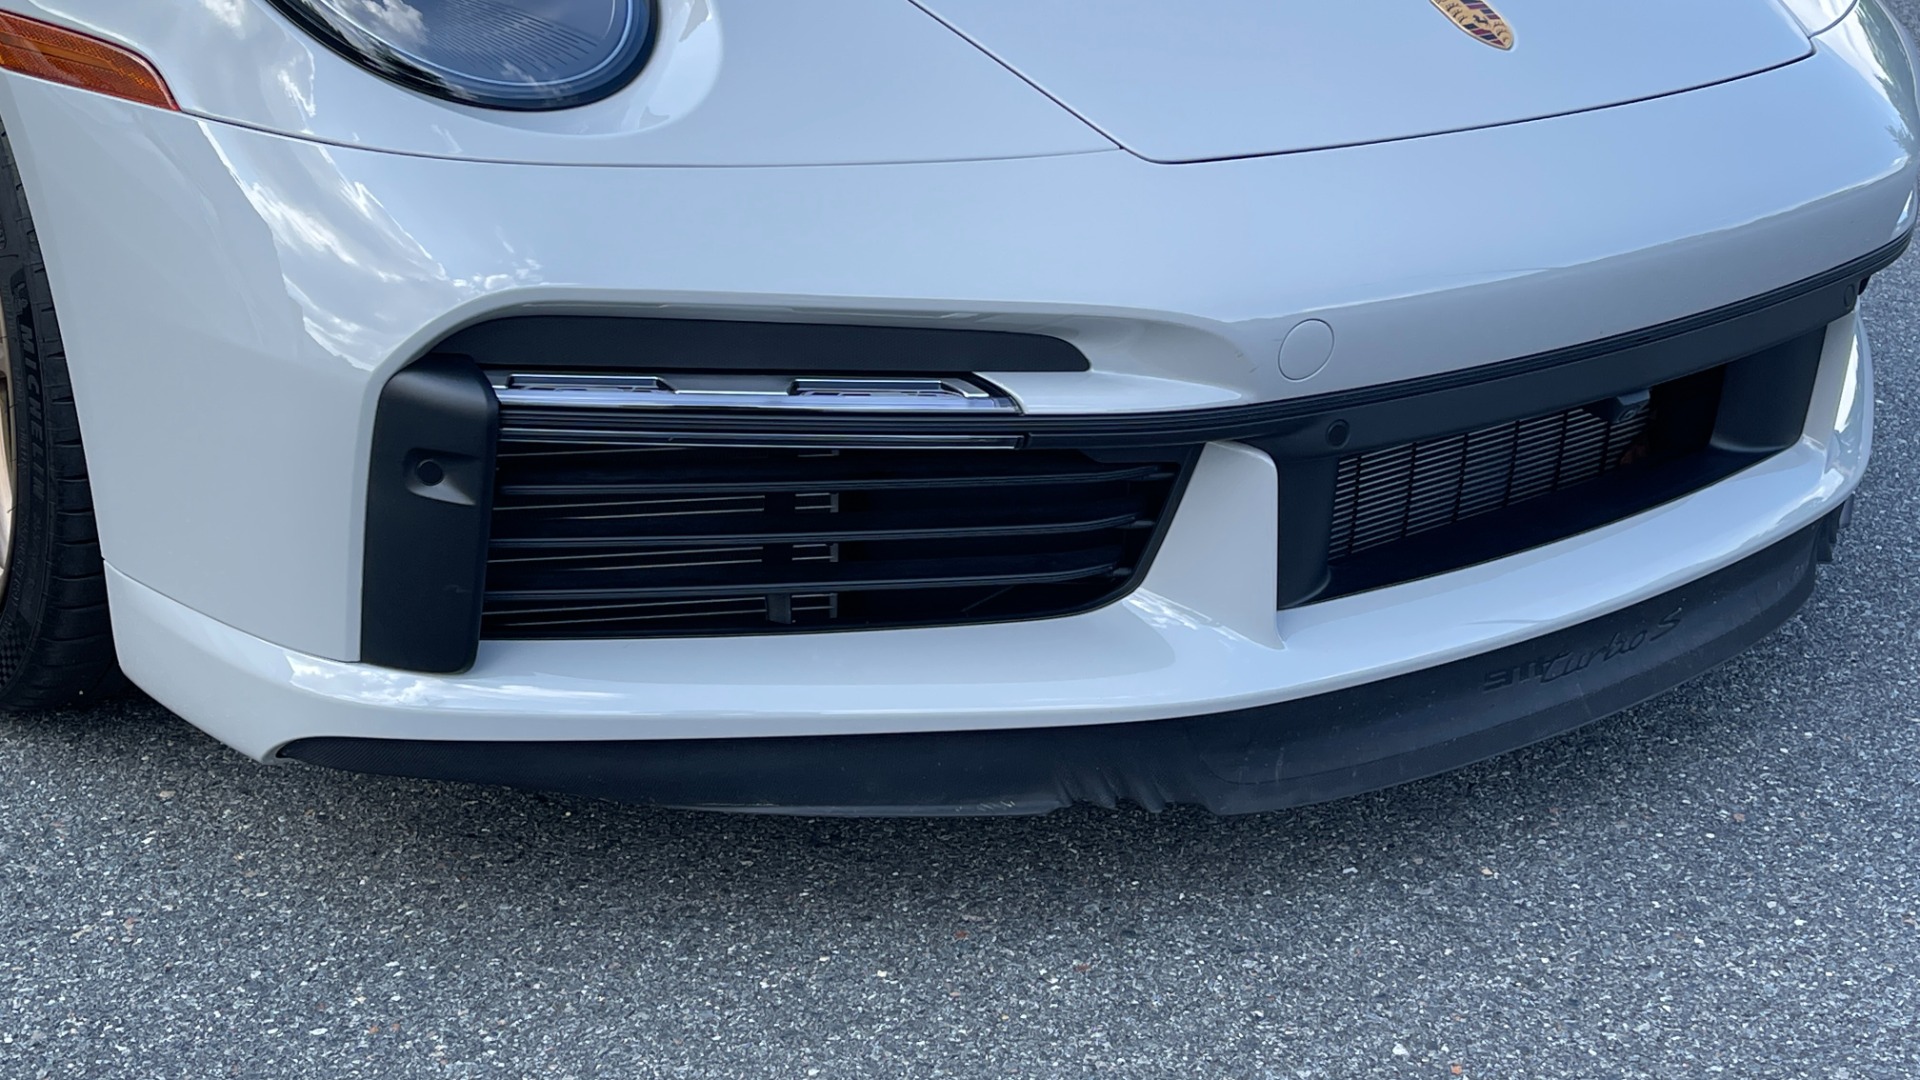 Used 2021 Porsche 911 Turbo S / HRE WHEELS / FRONT LIFT / MATRIX LIGHTS / PASM SUSPENSION for sale $299,000 at Formula Imports in Charlotte NC 28227 13